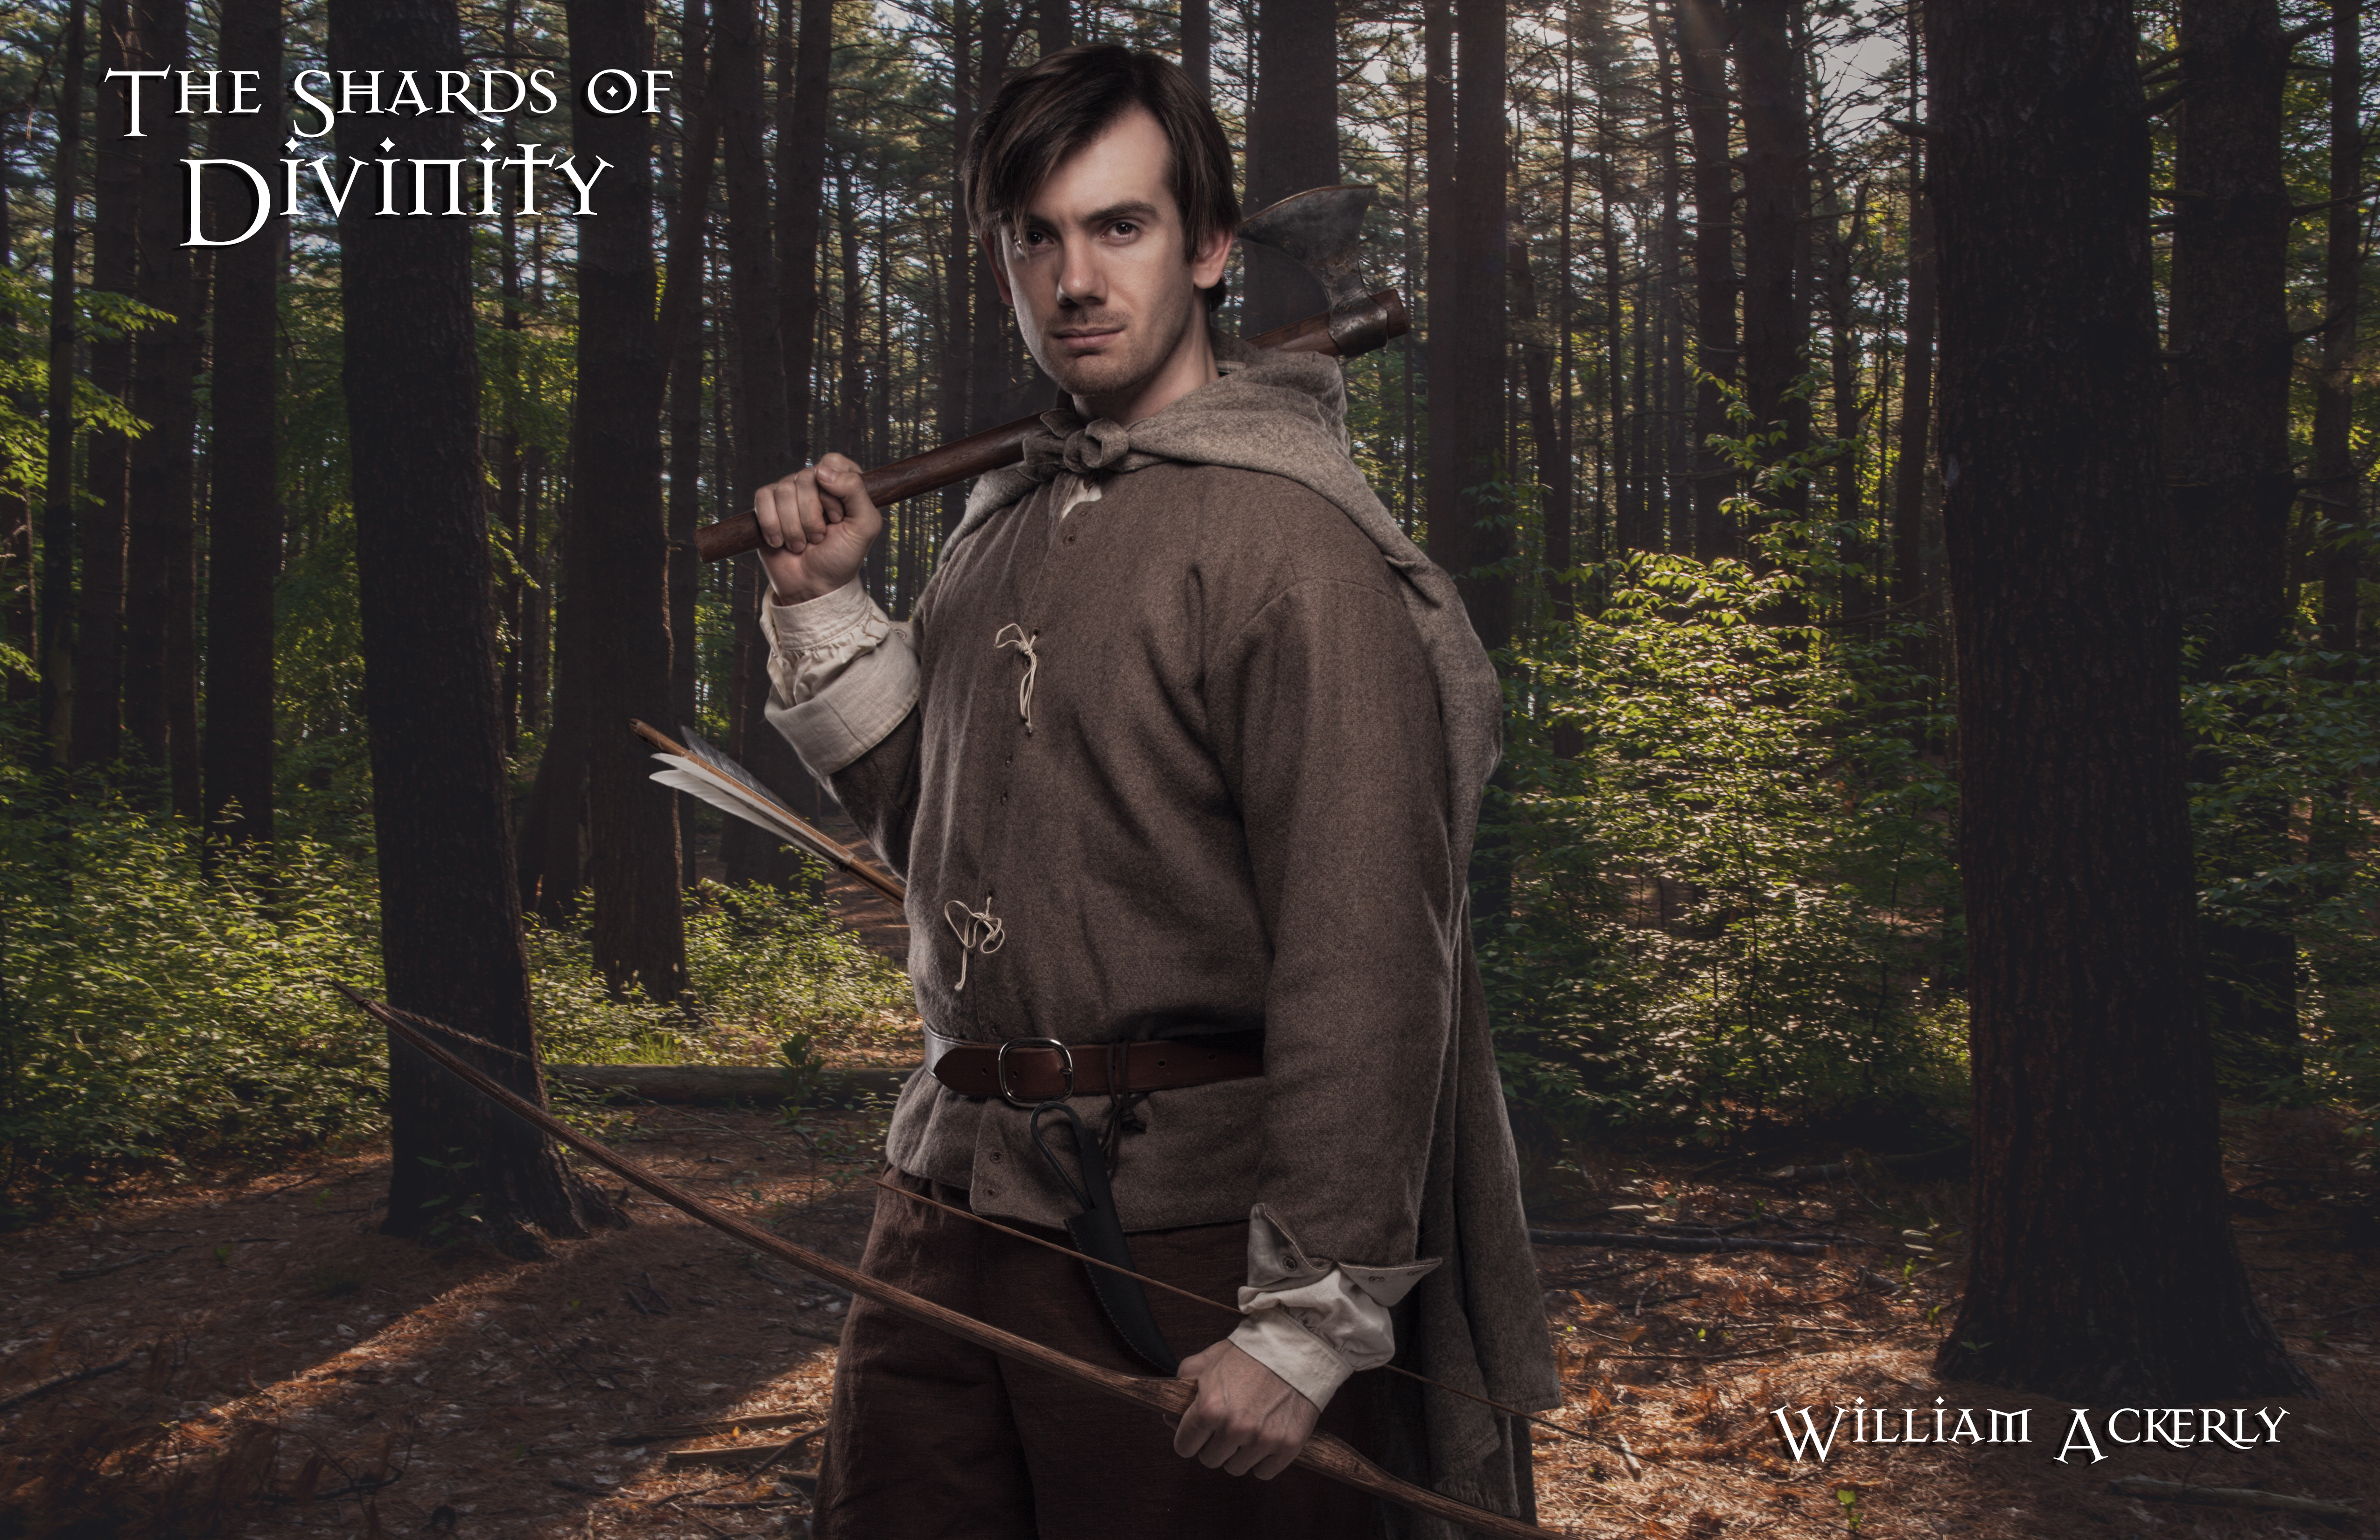 As William Ackerly in The Shards of Divinity: Broken Glass